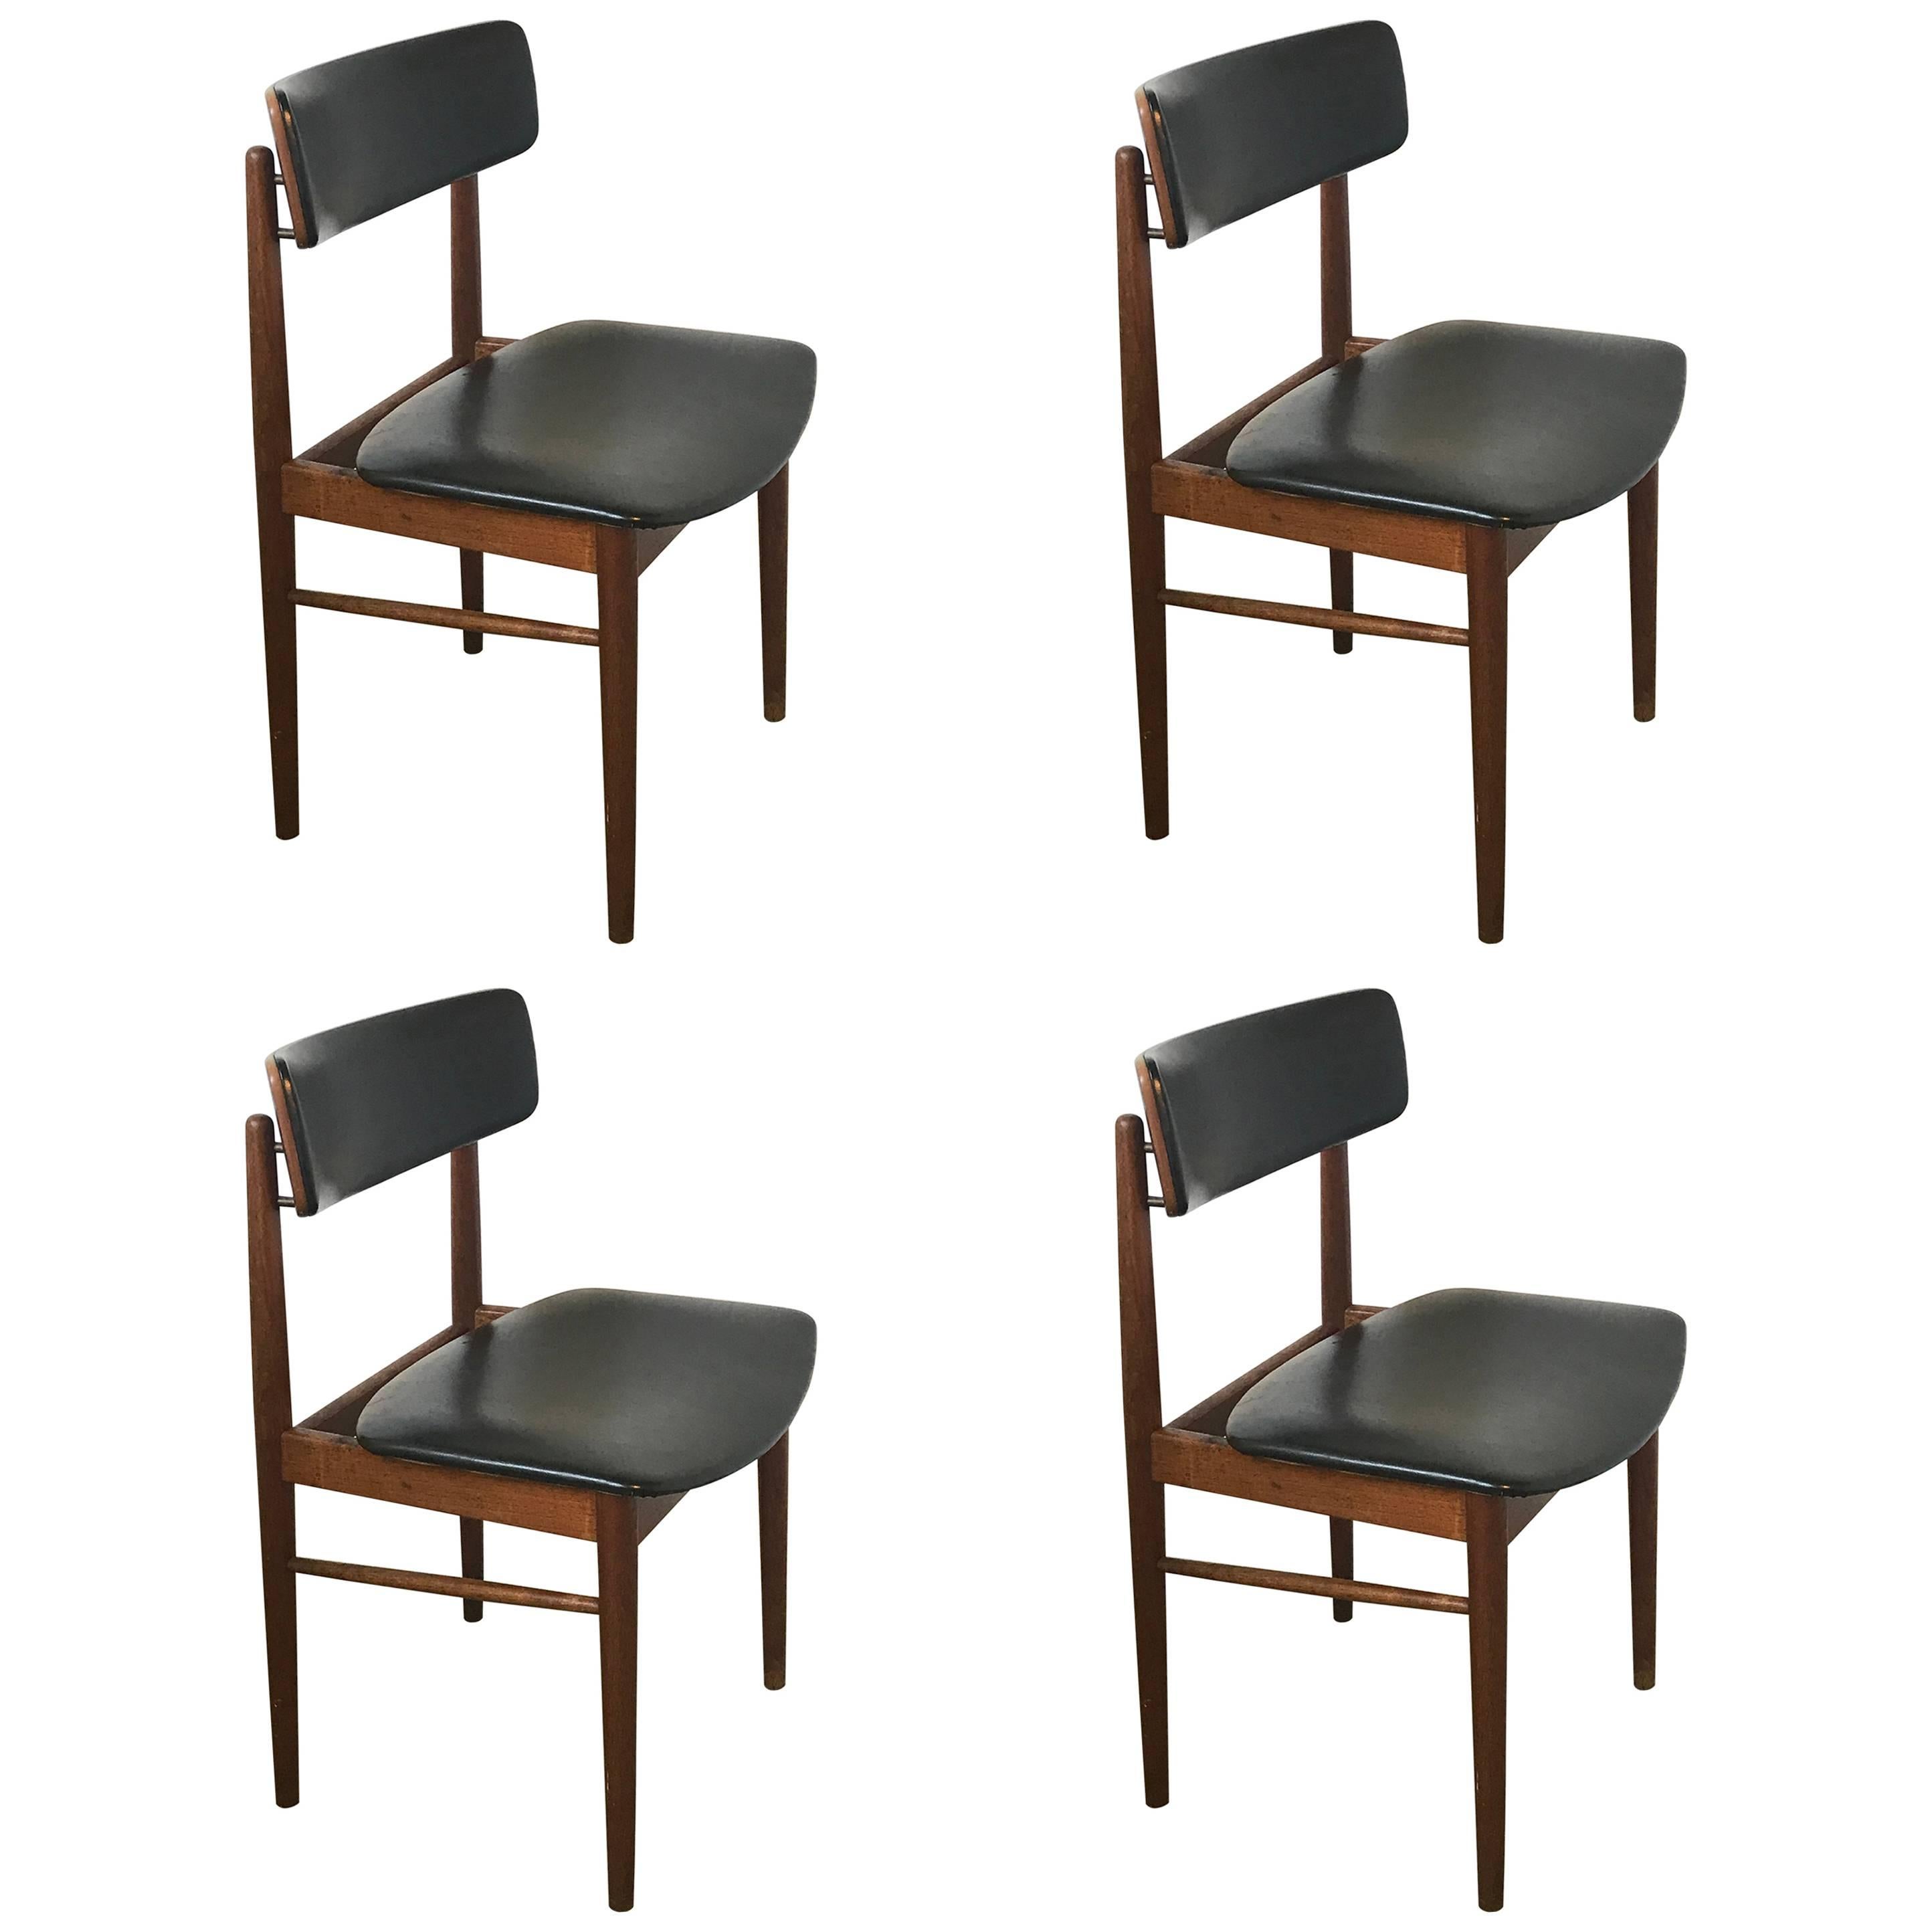 Set of Four Midcentury Teak Dining Chairs in the Style of Arne Vodder, Denmark